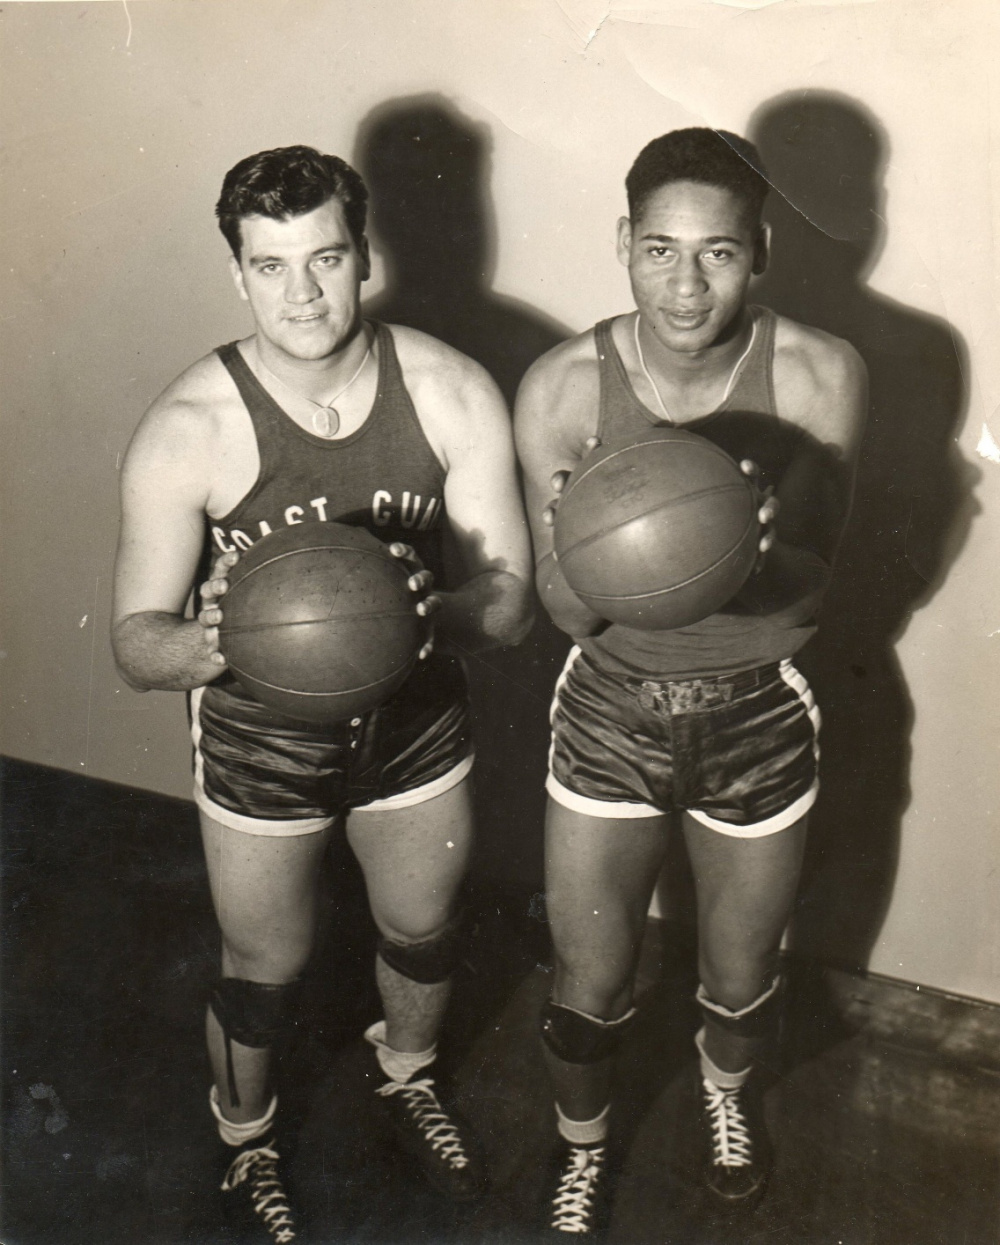 Emlen Tunnell, right, with his shipmate Louis Fiorella in Alameda, Calif. Emlen Tunnell was the first African American to play NFL football for the New York Giants. Tunnell also posthumously received the Coast Guard Silver Lifesaving Medal for his actions in World War II. (U.S. Coast Guard courtesy photo)